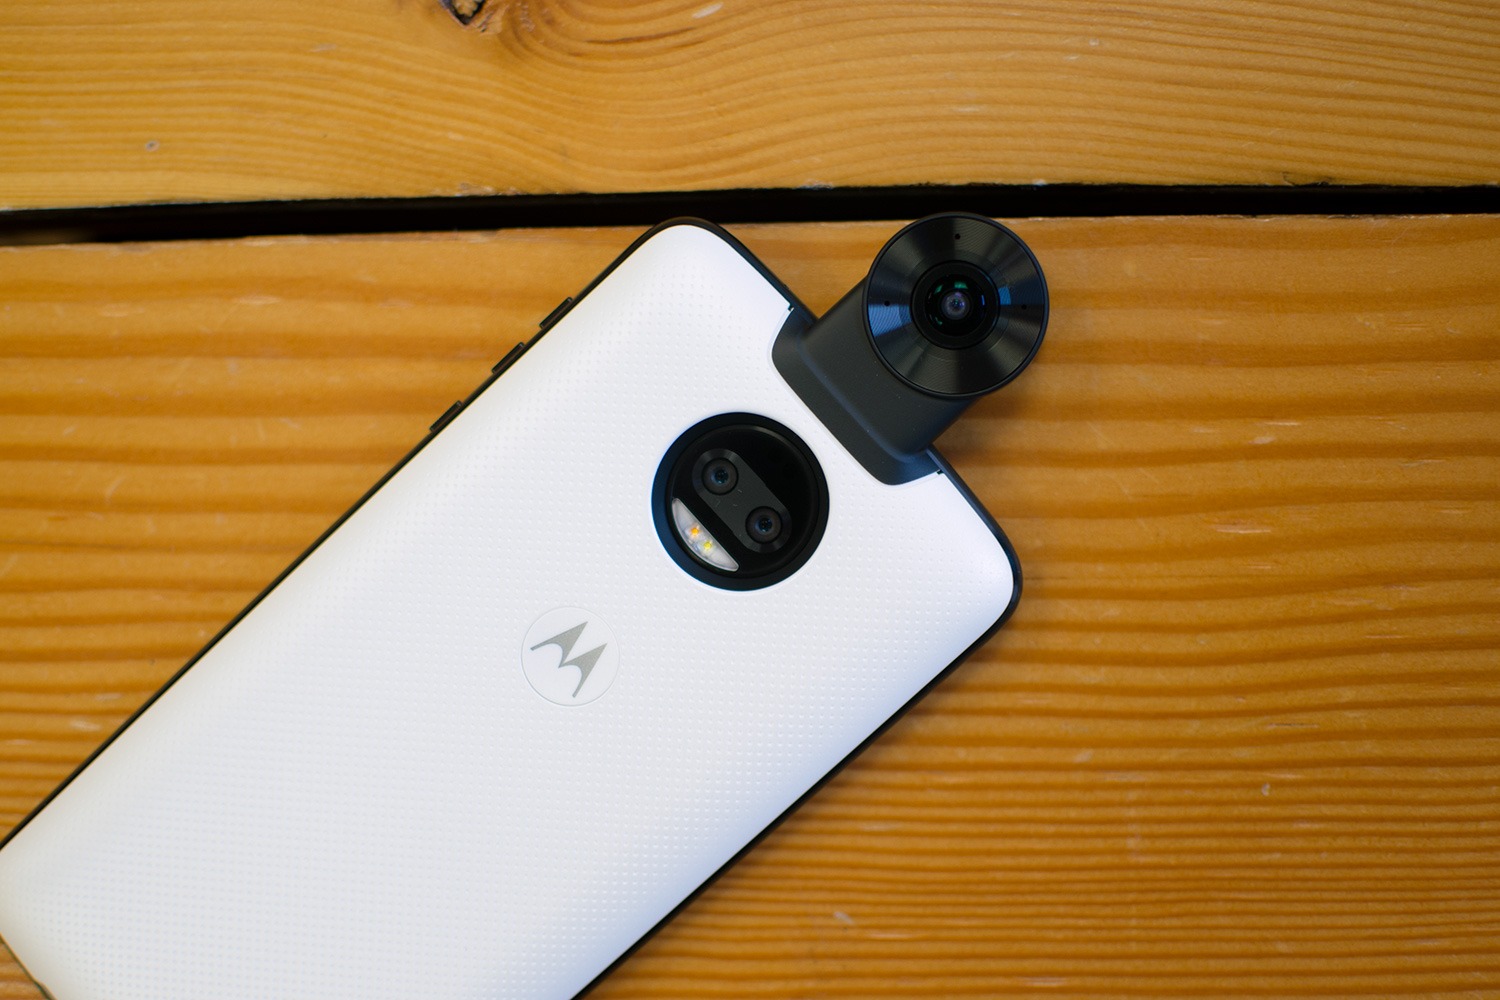 Motorola is Releasing a 360-Degree Camera that Snaps to Your Phone